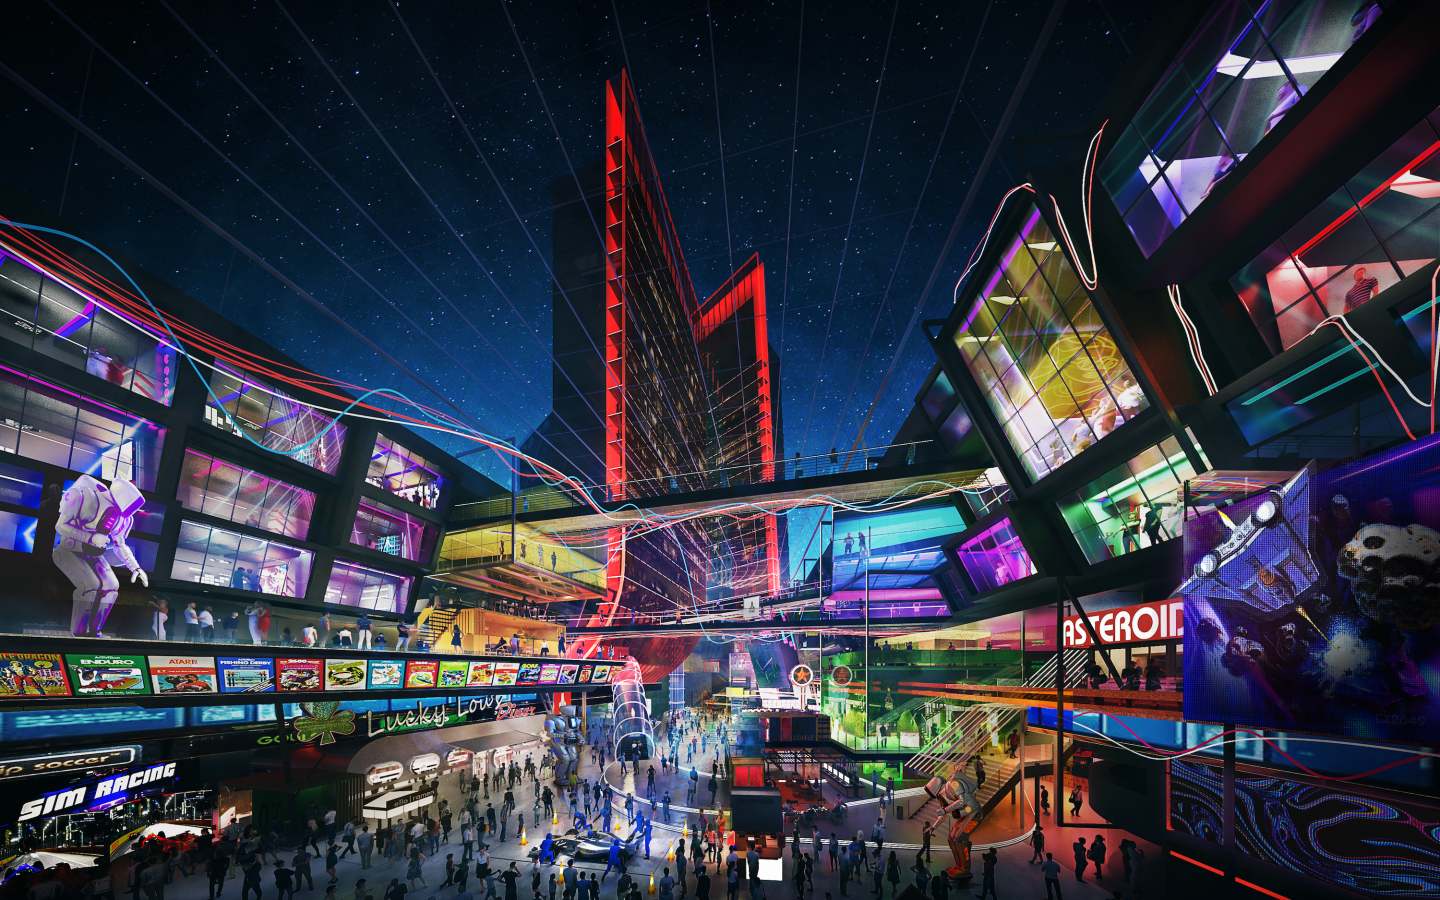 The Las Vegas Atari Hotel will offer video game-related entertainment, including VR, AR, and esports